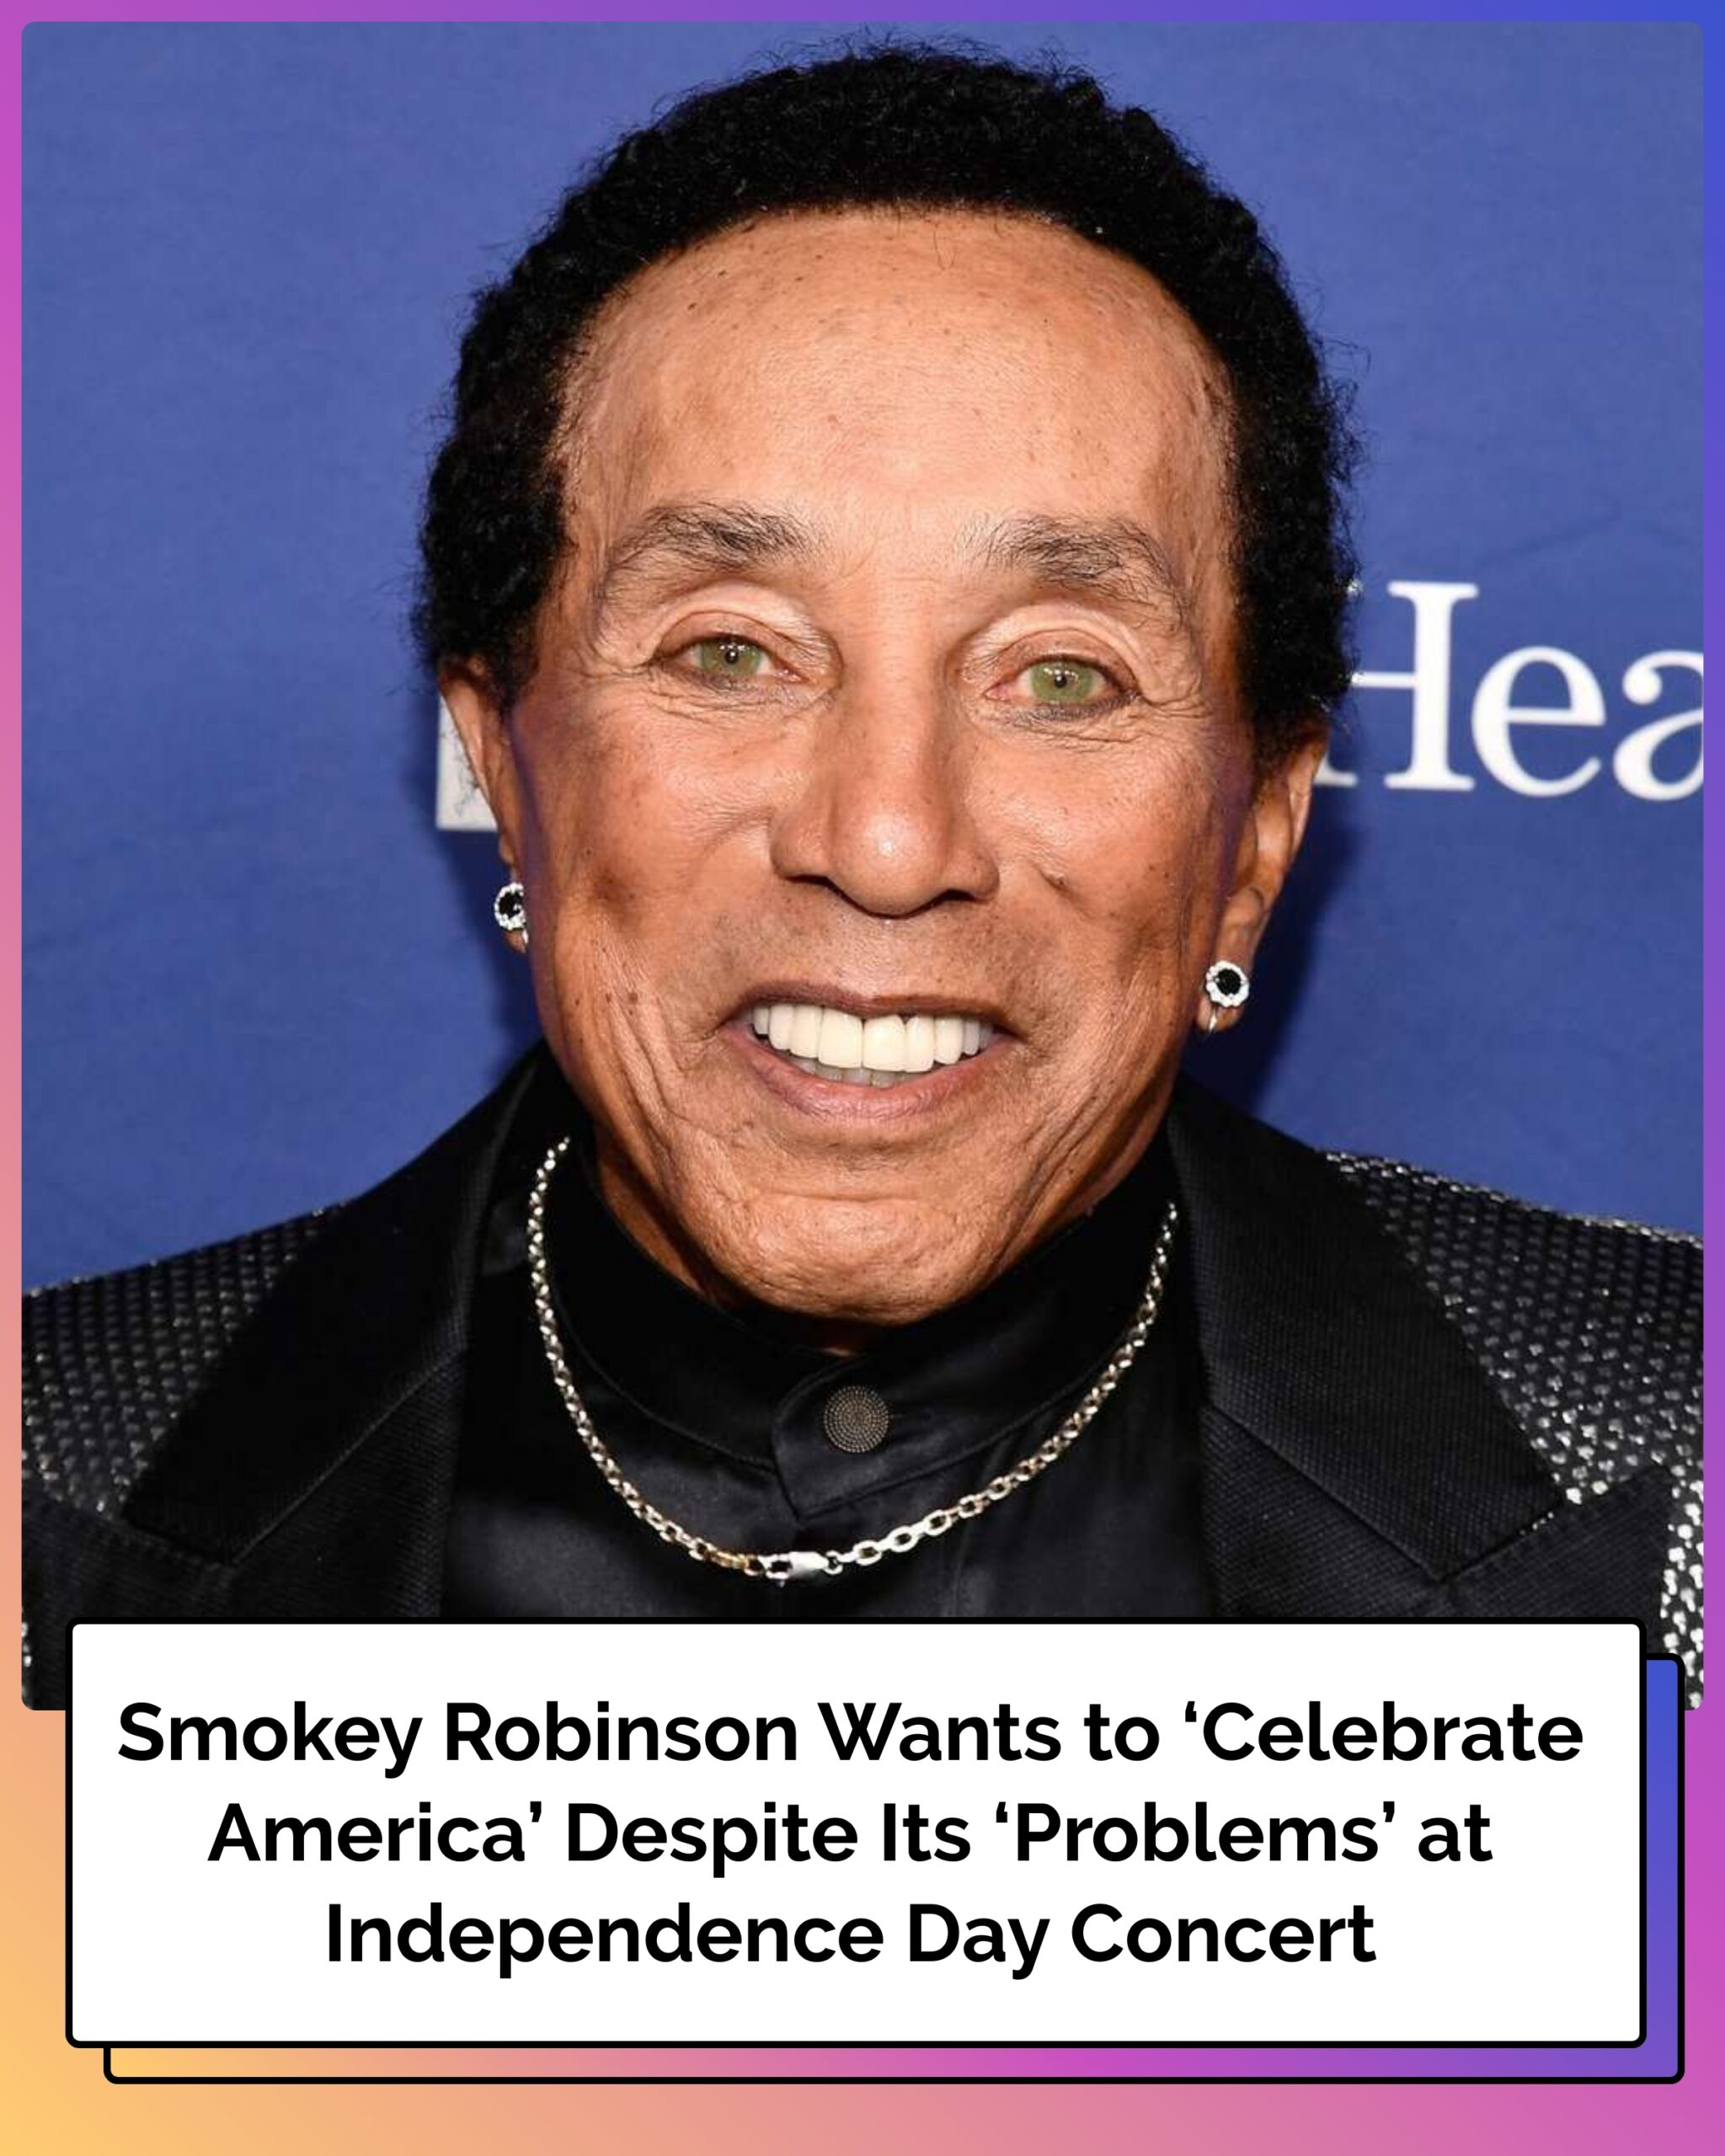 Smokey Robinson Wants to ‘Celebrate America’ Despite Its ‘Problems’ at Independence Day Concert